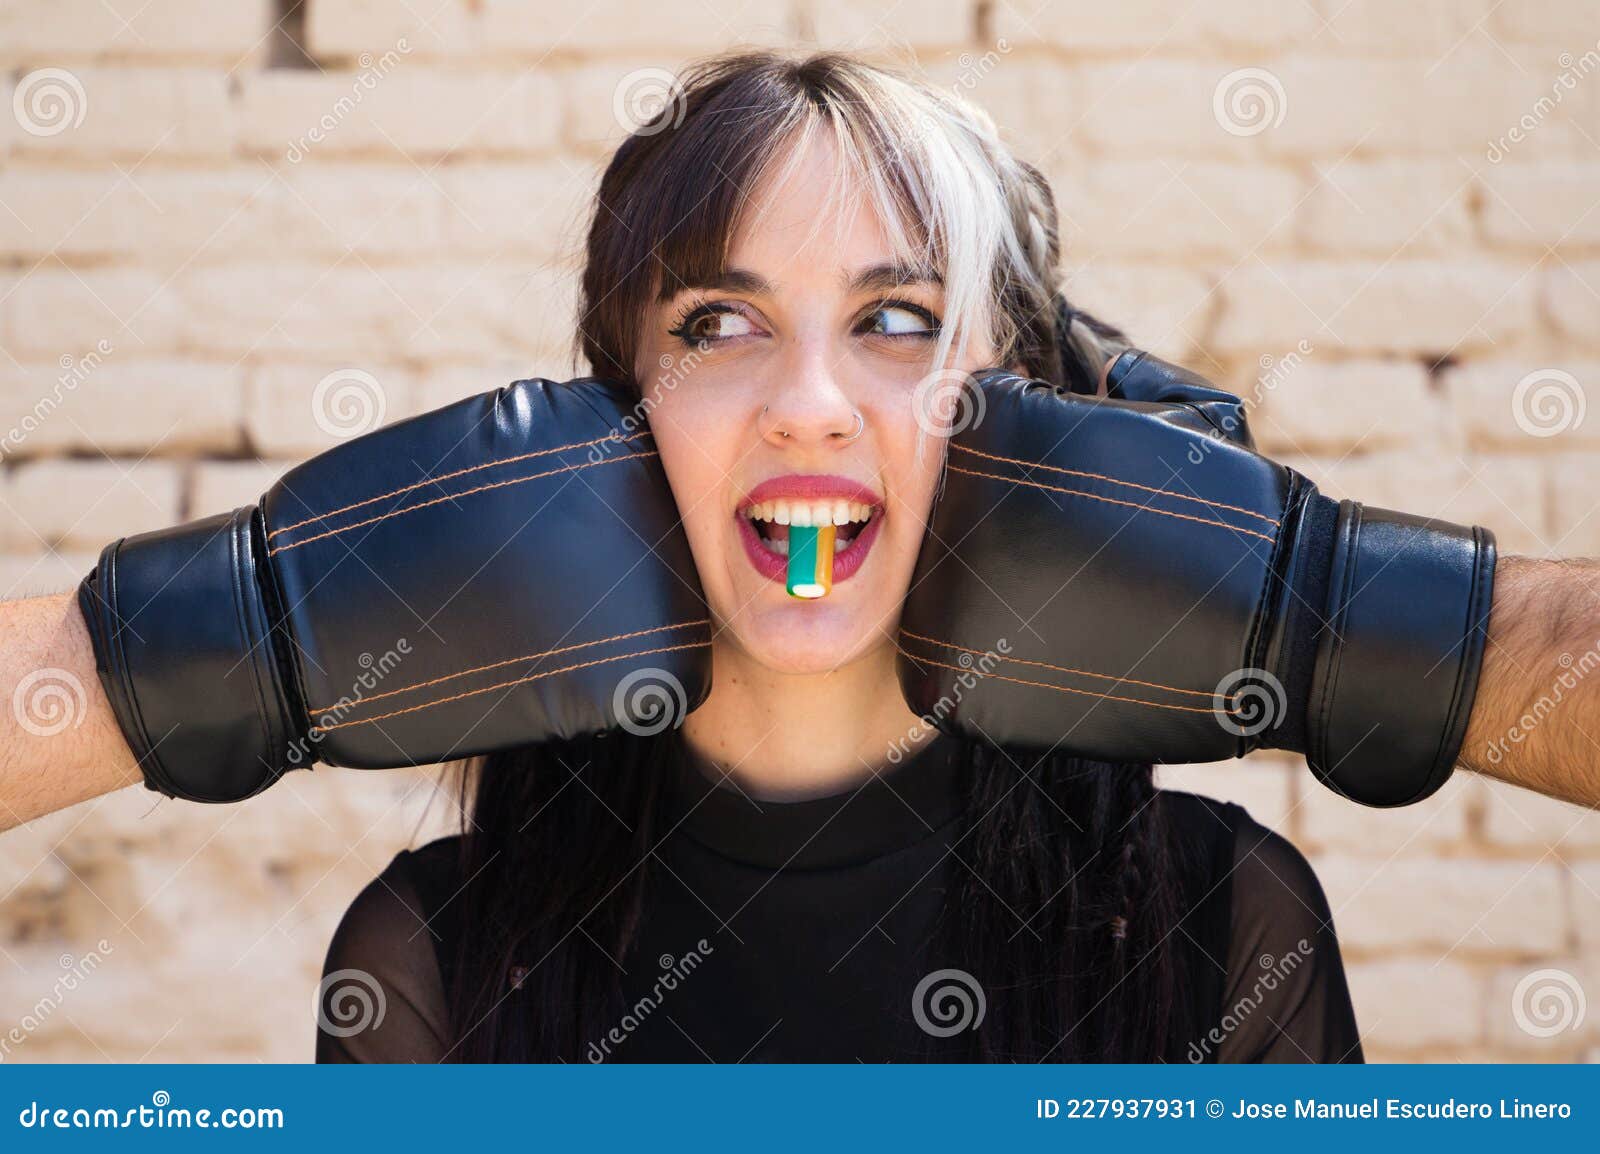 young and pretty girl with a punkish tendency. she is being hit on each side of her face with boxing gloves while holding a jelly